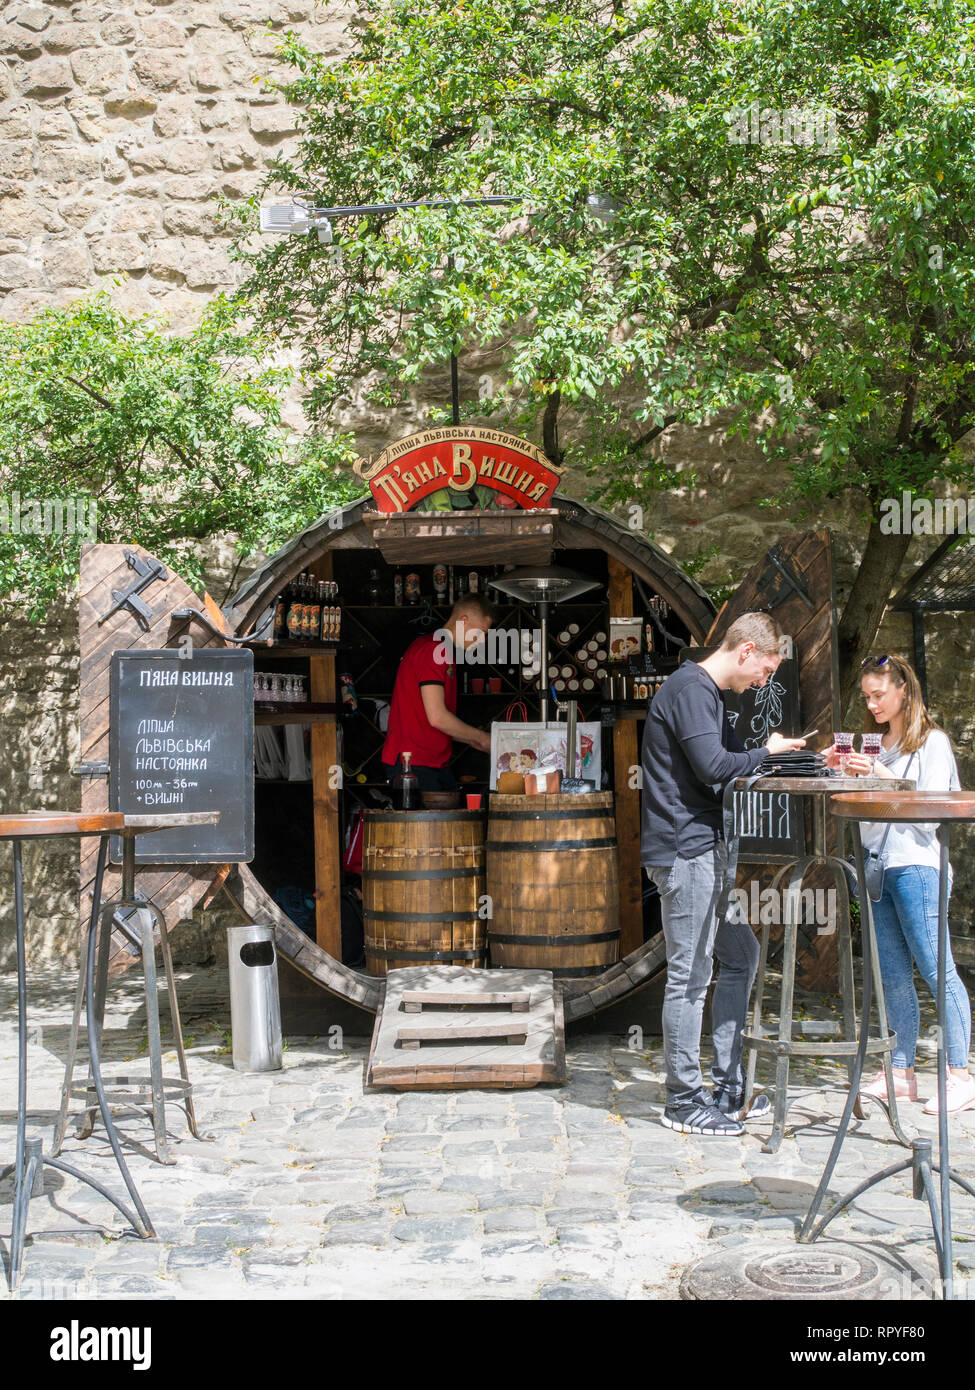 A bar selling cherry liquor in the old town of Lviv, Ukraine. Lviv's well preserved architecture, which blends Central and Eastern European styles, an Stock Photo